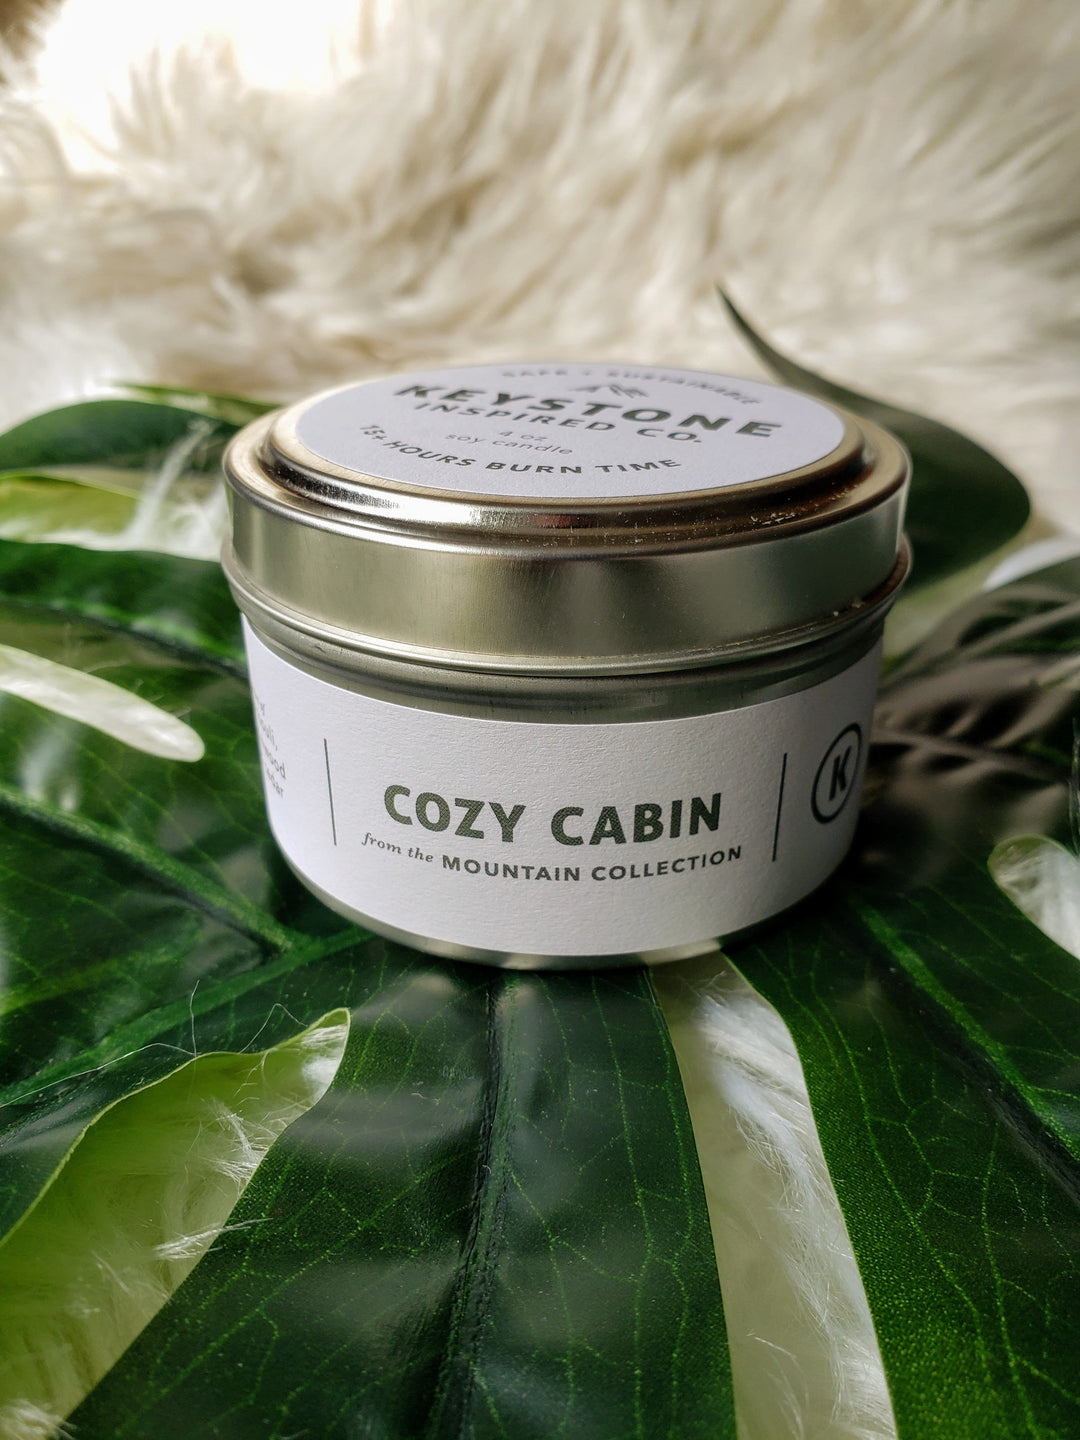 Cozy Cabin Travel Tin Candle